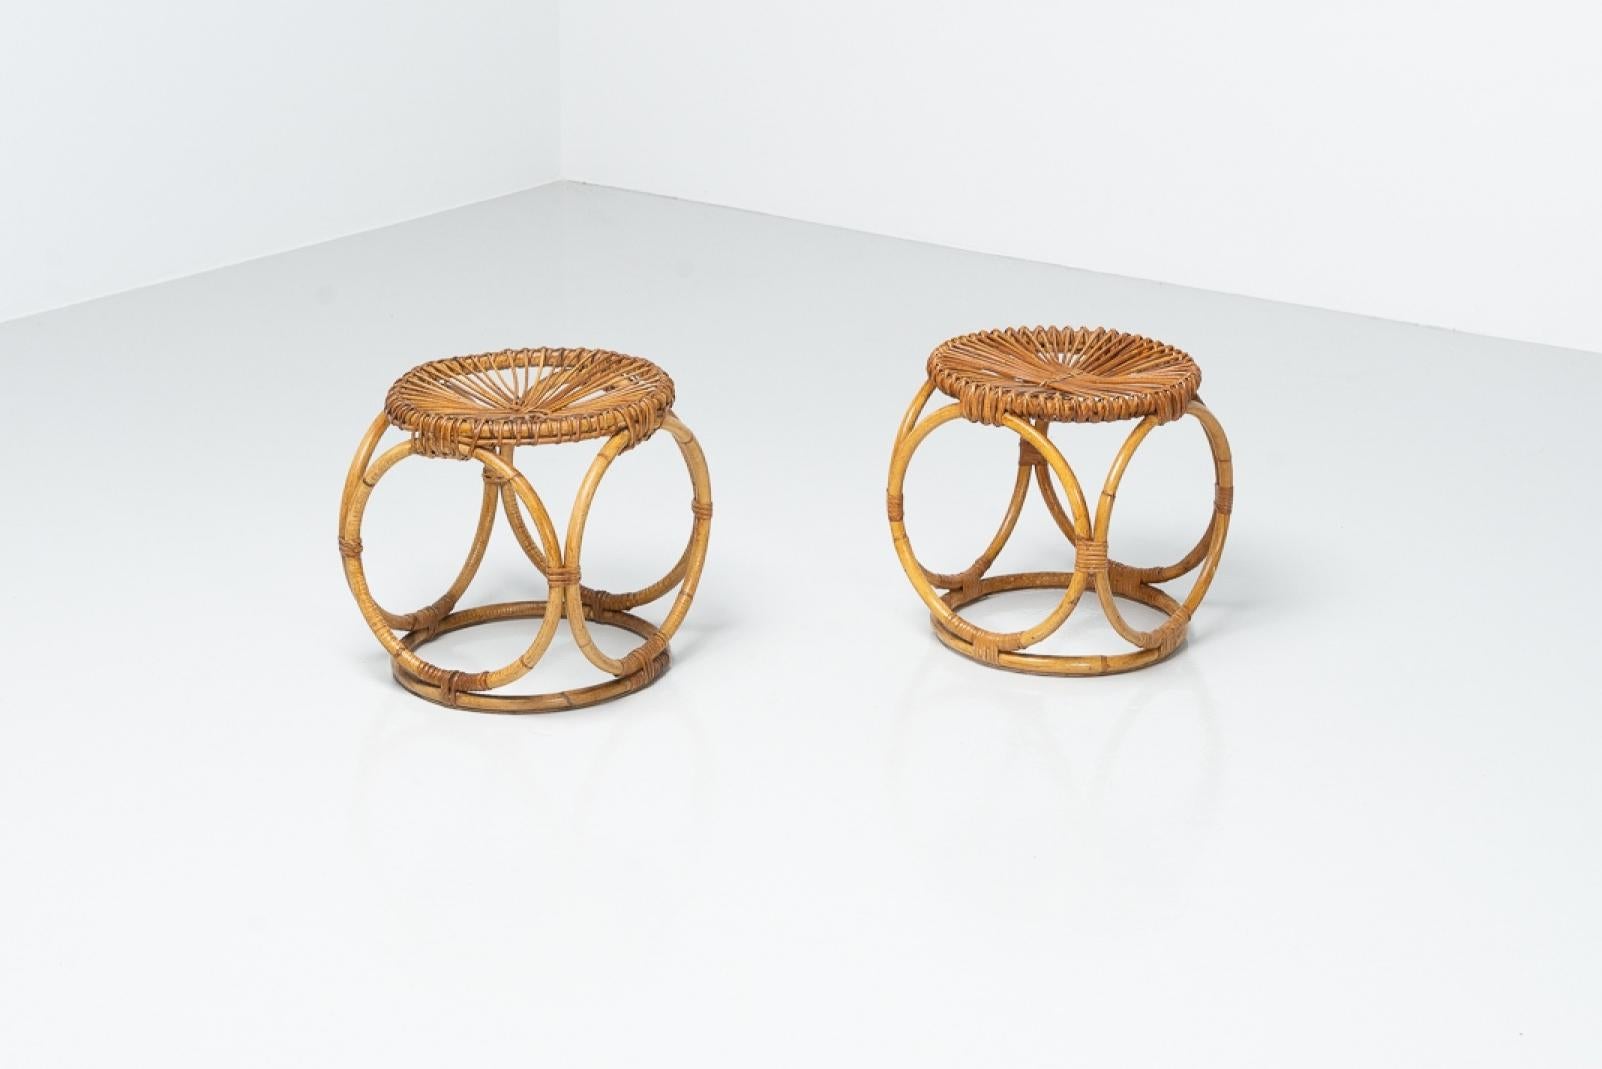 Interesting pair of stools in rattan, made in spain ca 1950. The condition is very good, no signs of heavy usage or weakened parts of framework. These particular stools have unusual shaped frames and a beautifully woven pattern on top, and are a